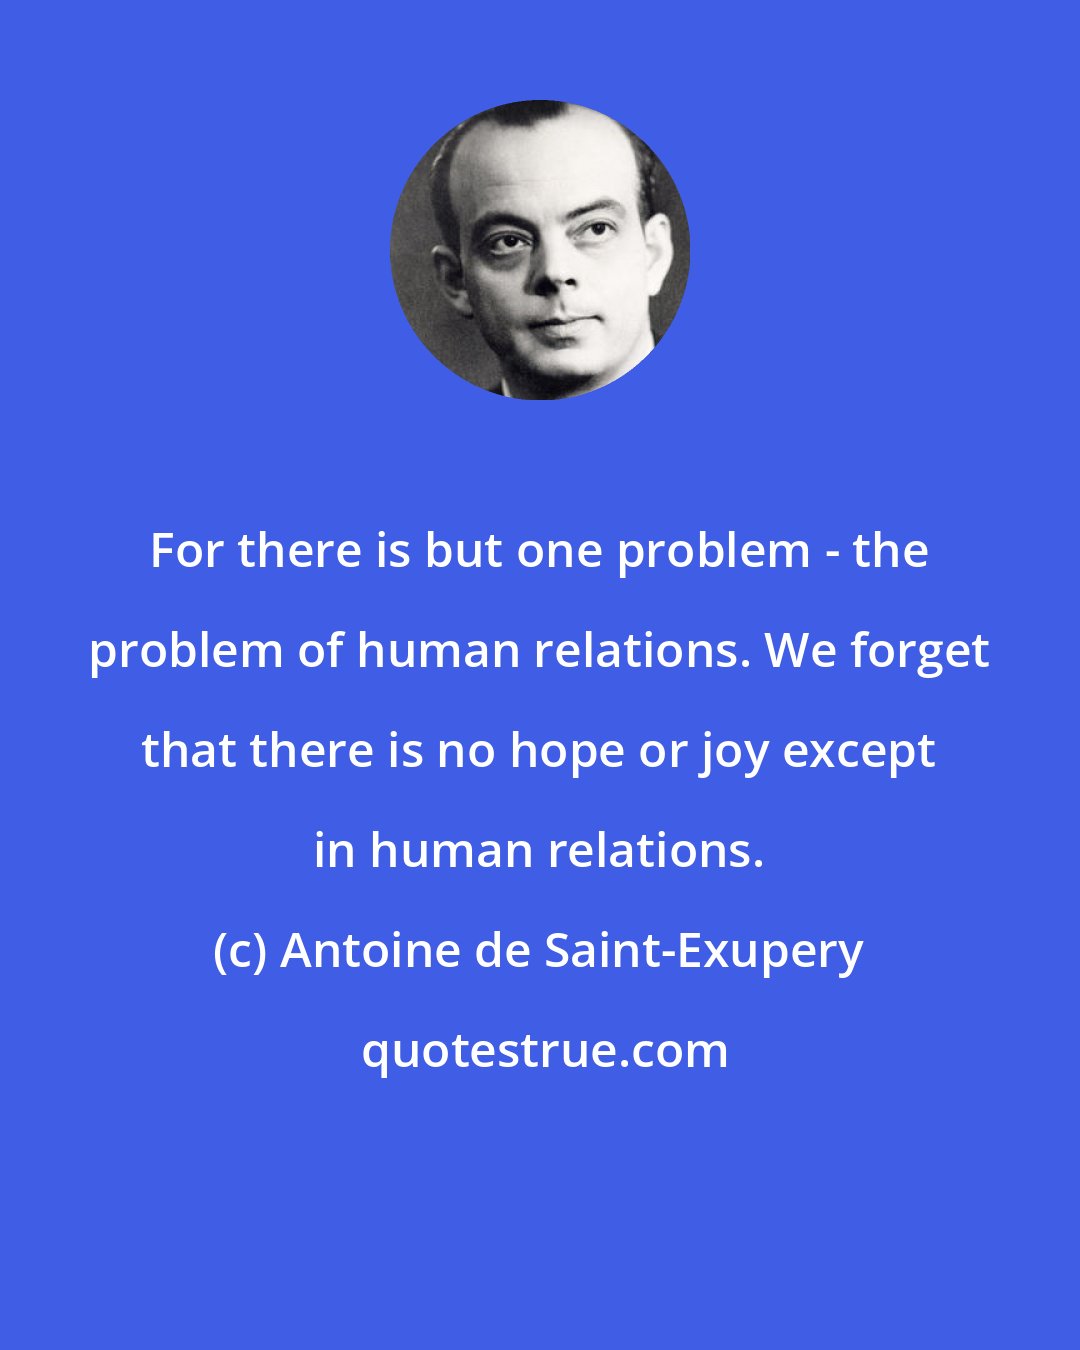 Antoine de Saint-Exupery: For there is but one problem - the problem of human relations. We forget that there is no hope or joy except in human relations.